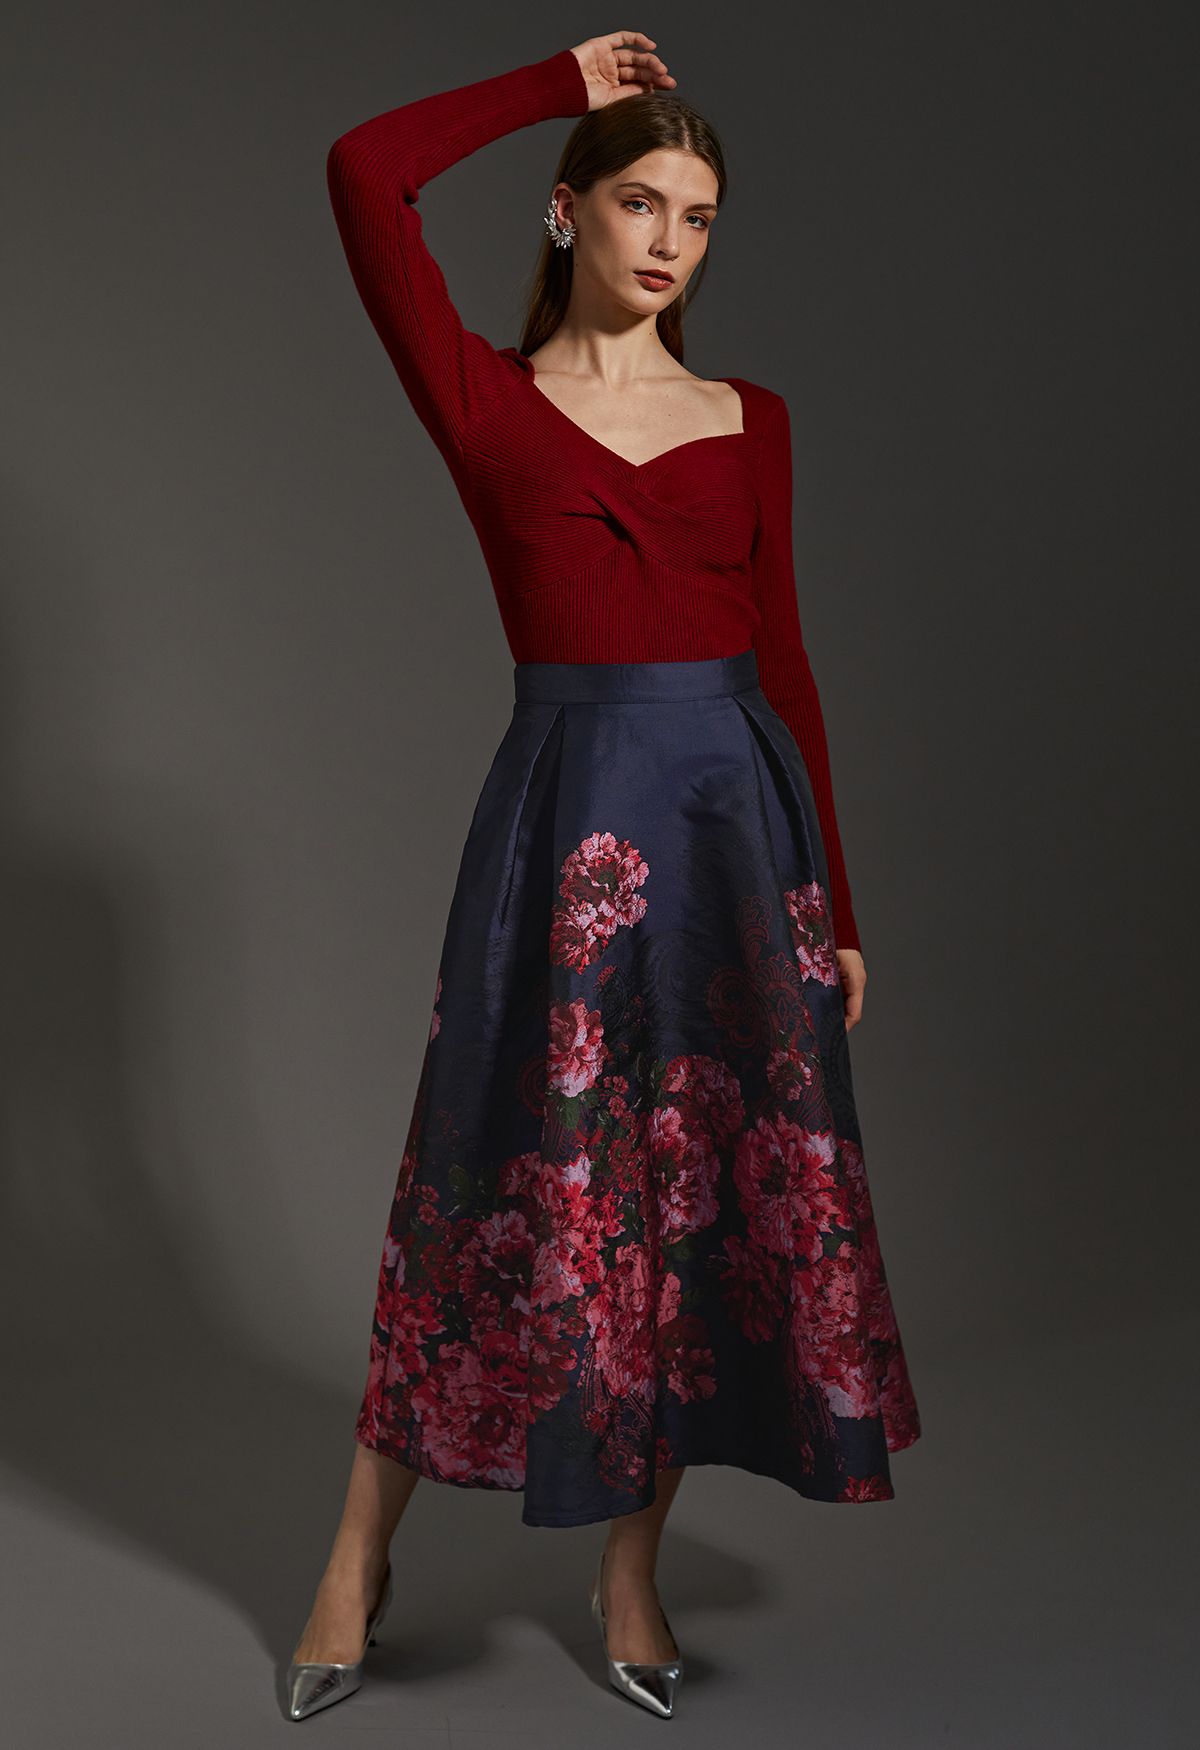 Bewitching Peony Jacquard Flare Skirt in Navy